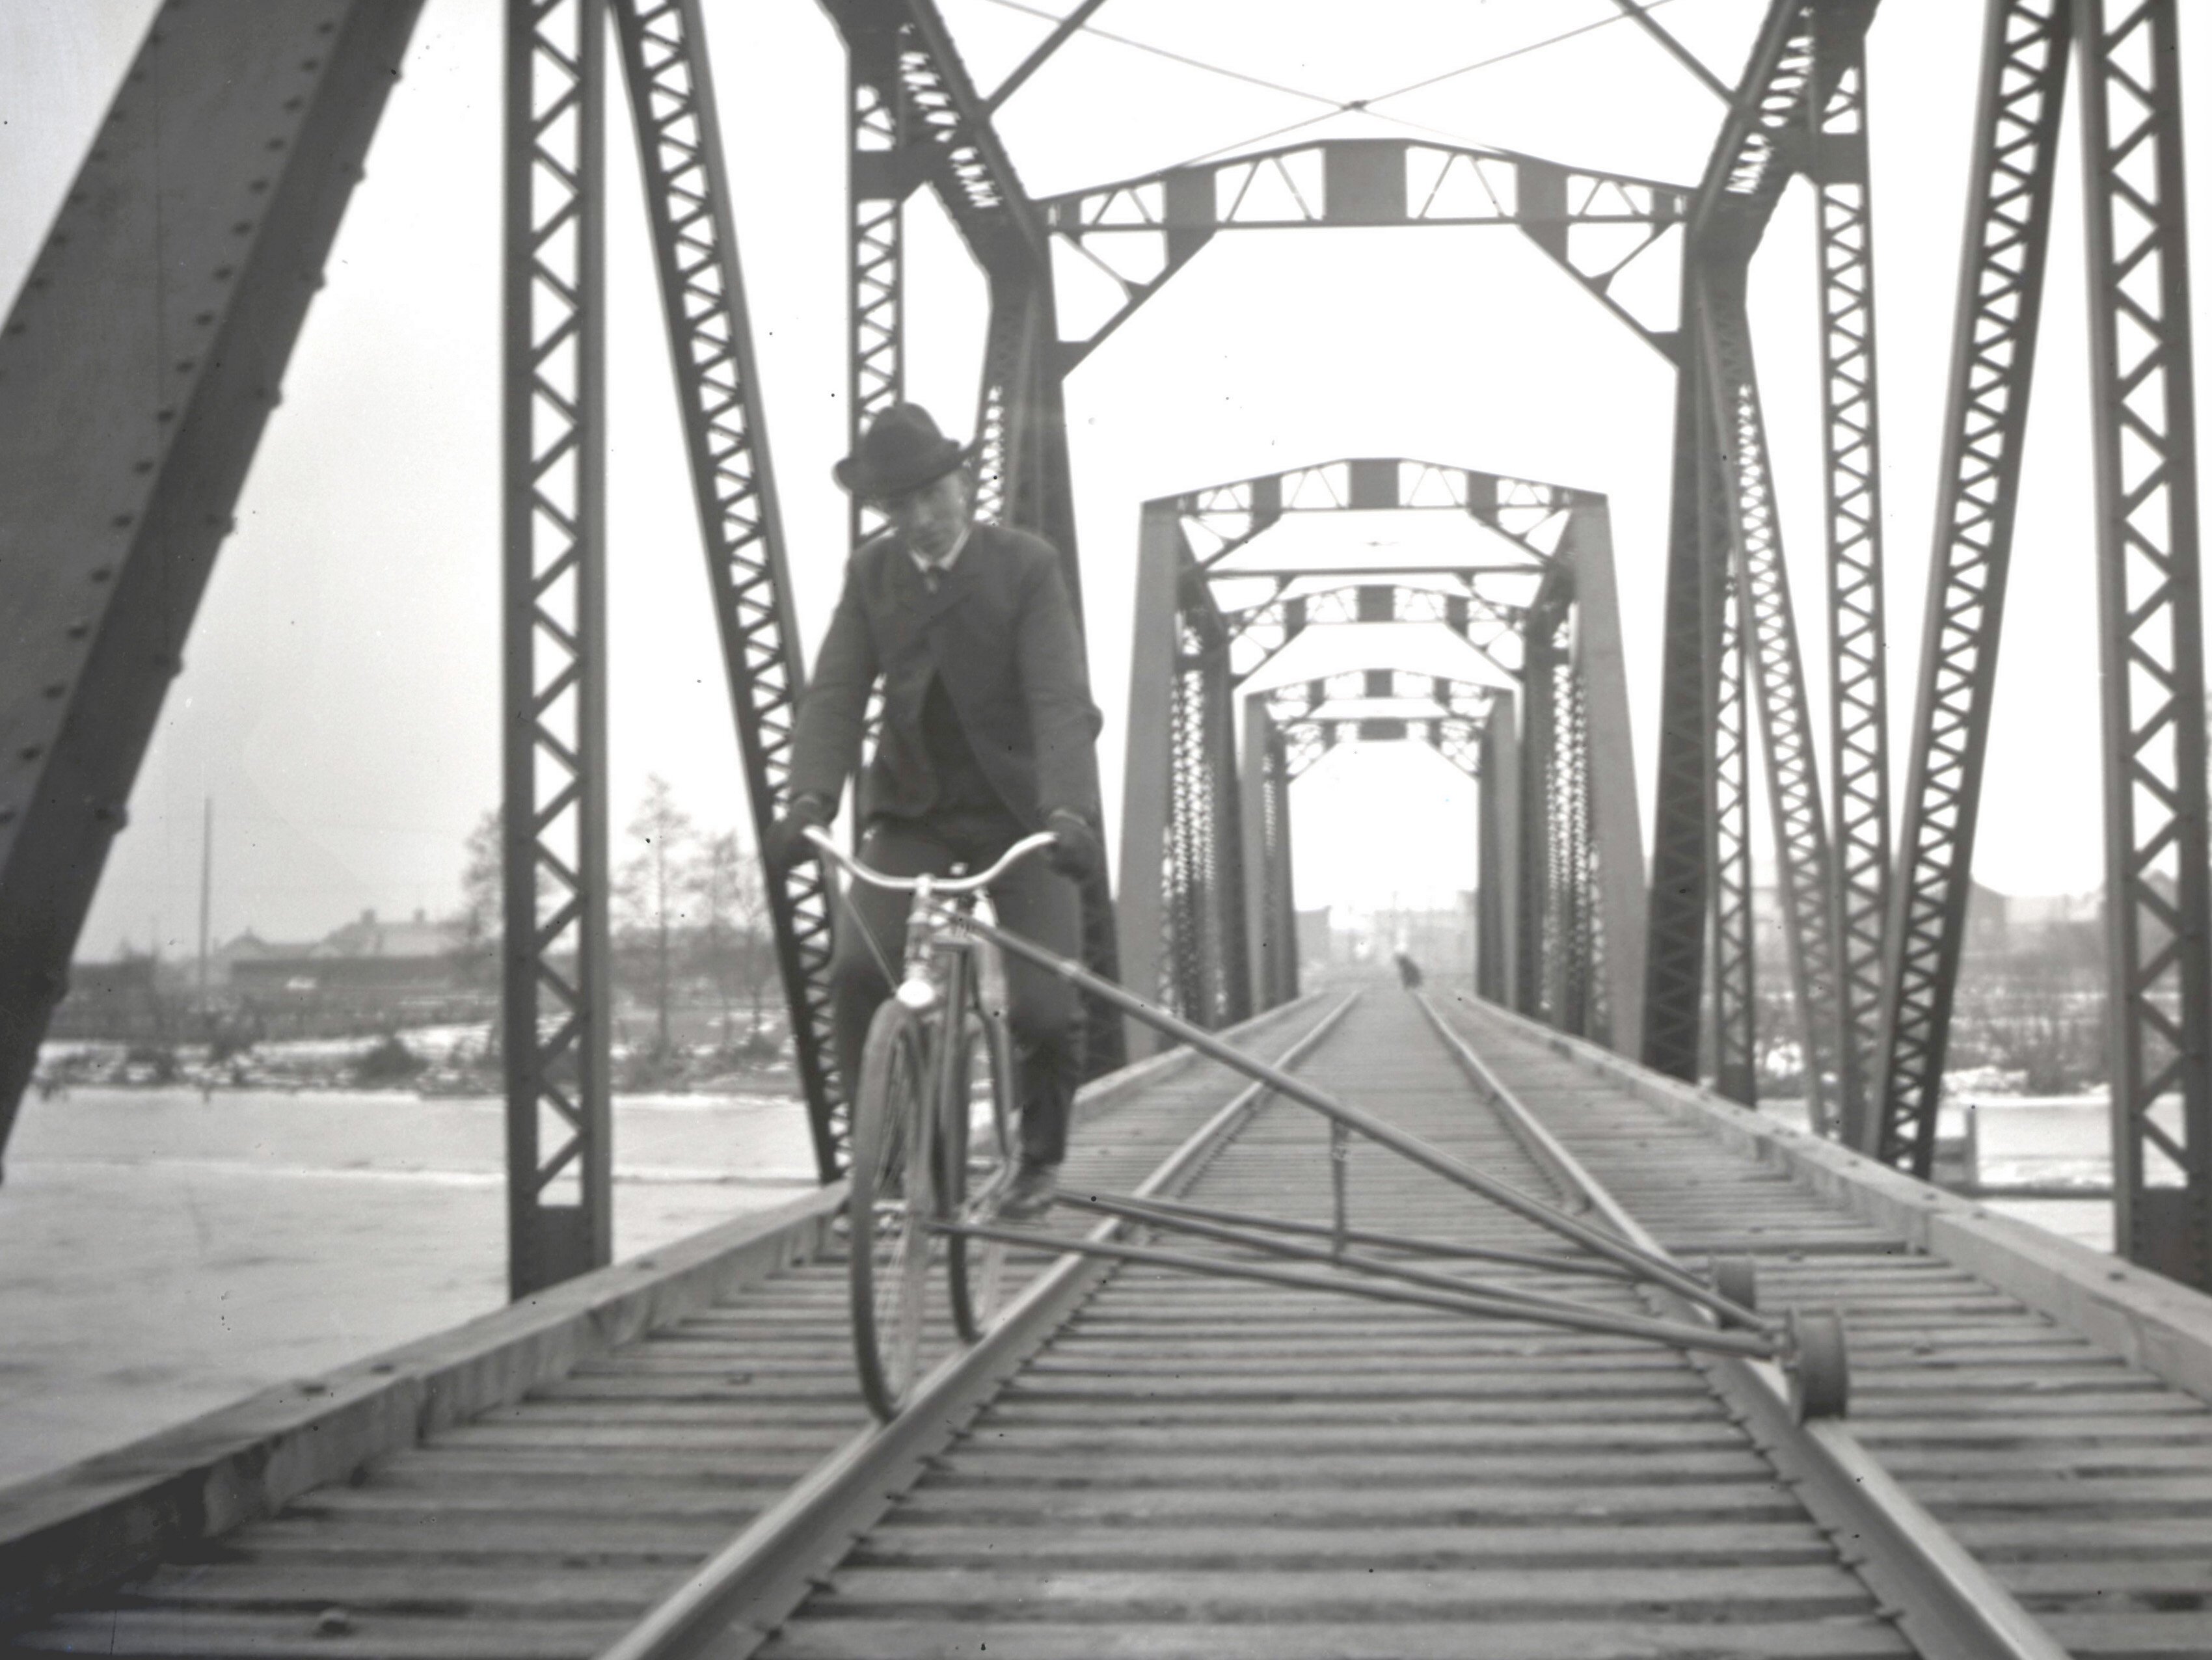 An unidentified man rides a railroad bike along the tracks in Manistique.